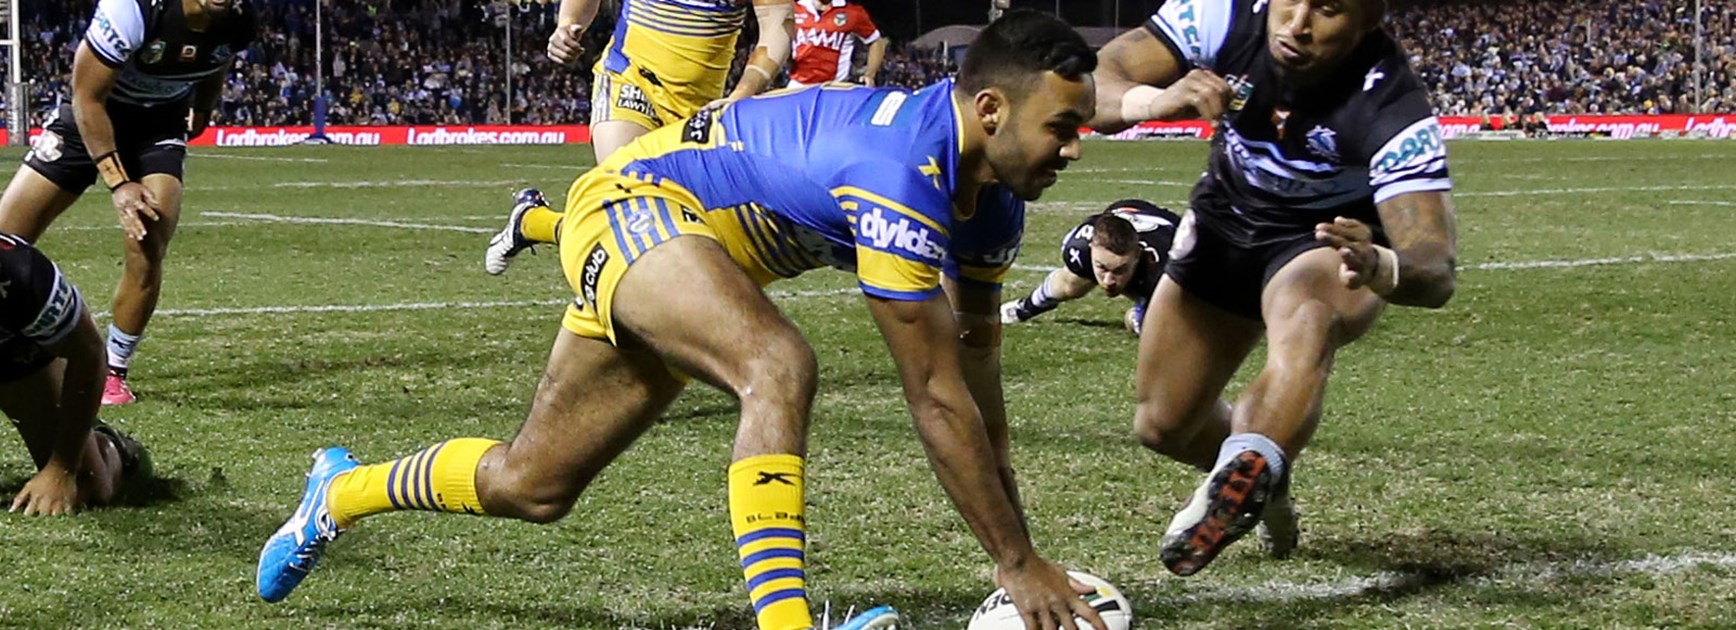 Eels winger Bevan French scored three tries against the Sharks in Round 17.